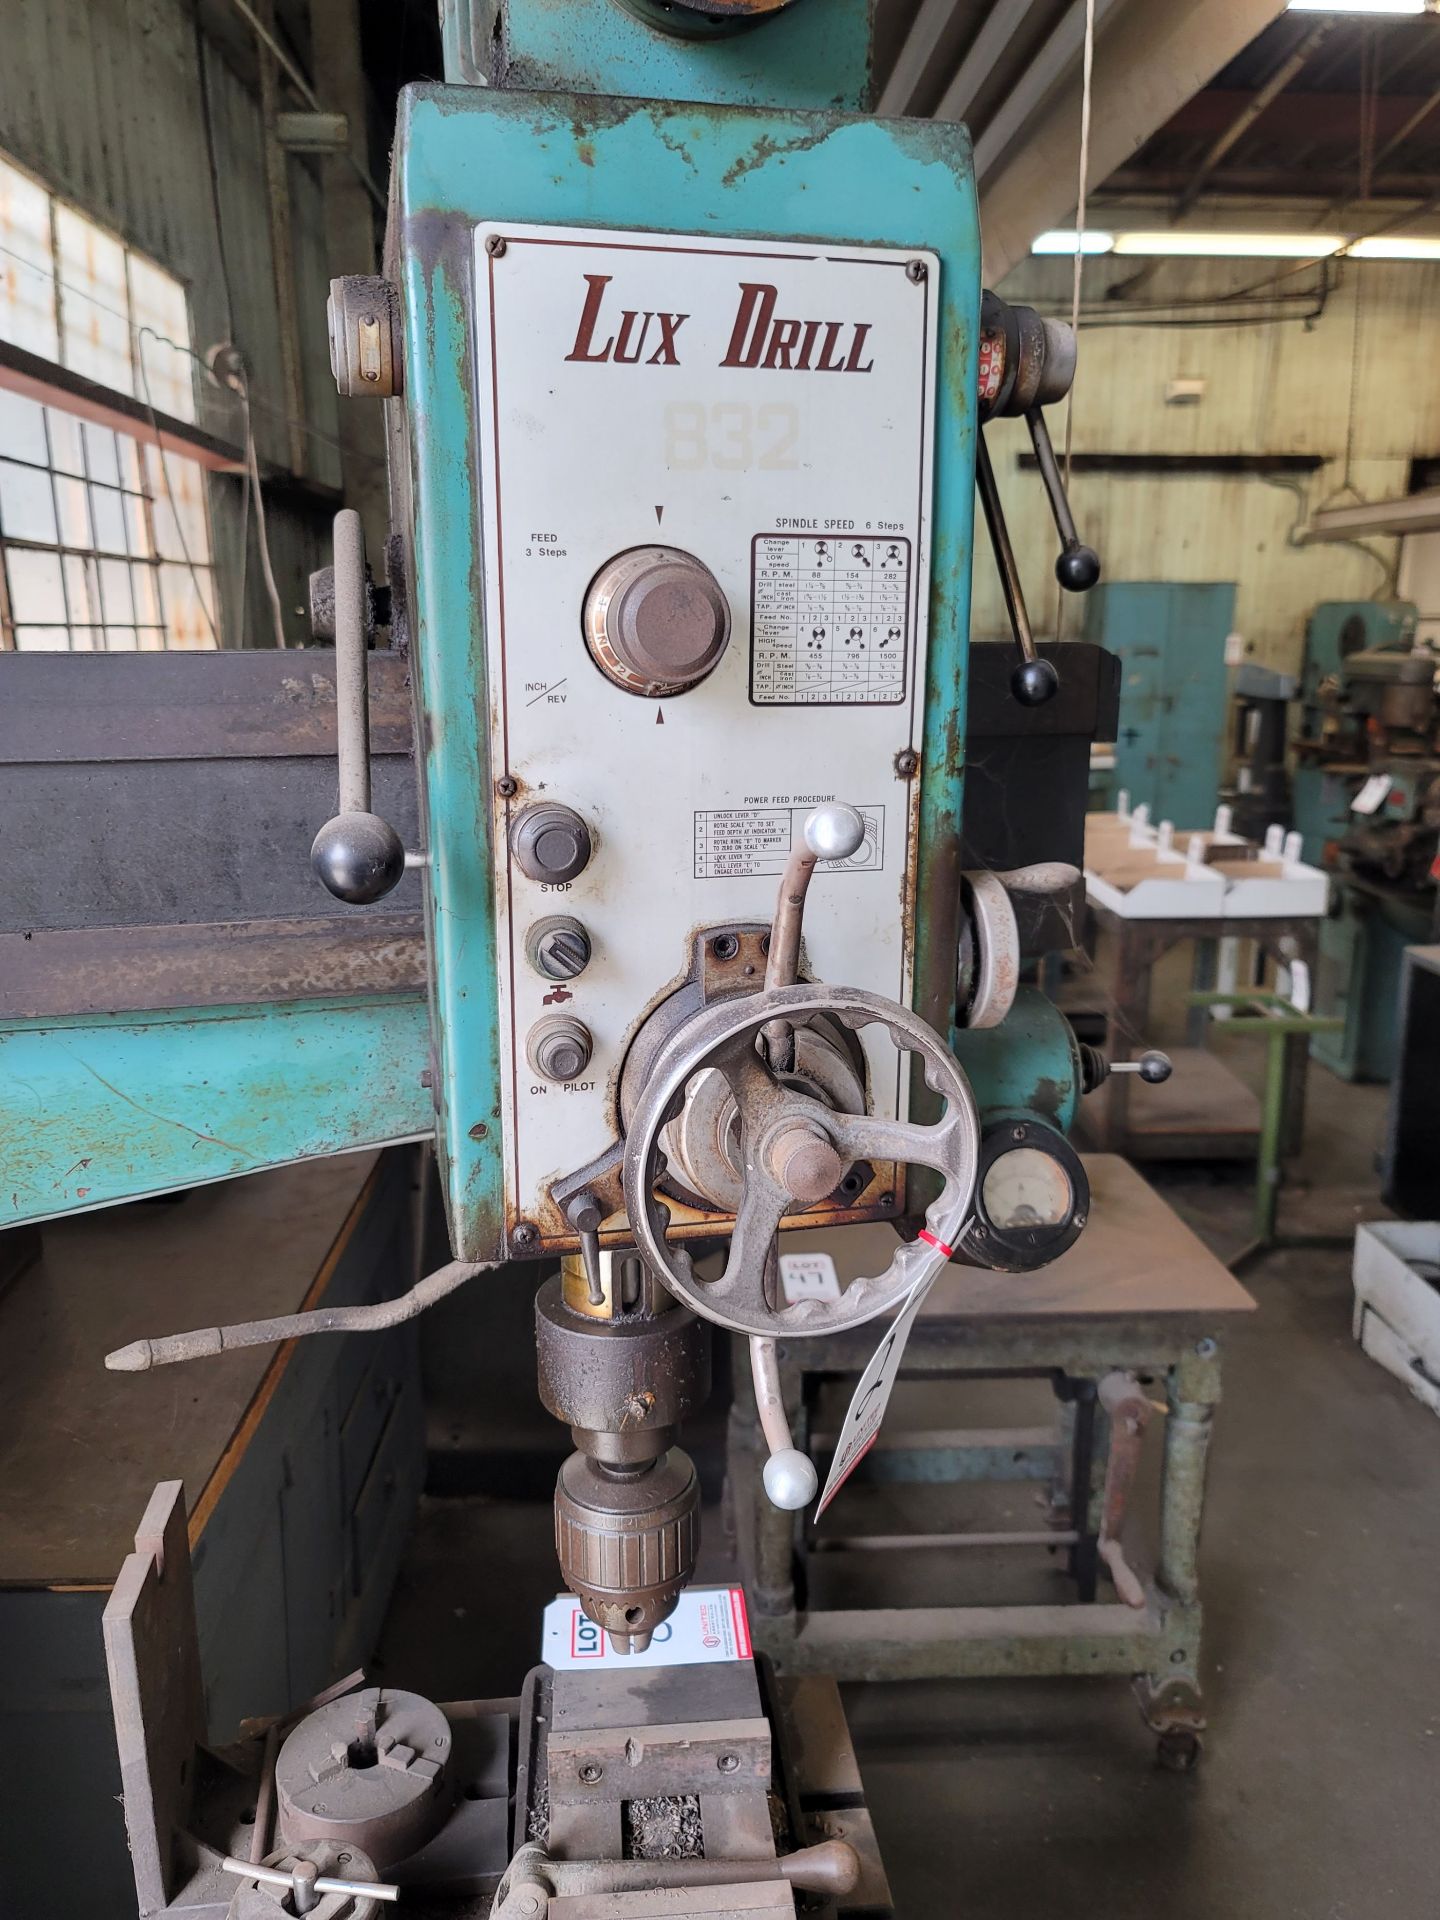 LUX DRILL RADIAL ARM DRILL, MODEL 832, S/N 7765, W/ T-SLOT ANGLE BLOCK - Image 4 of 8